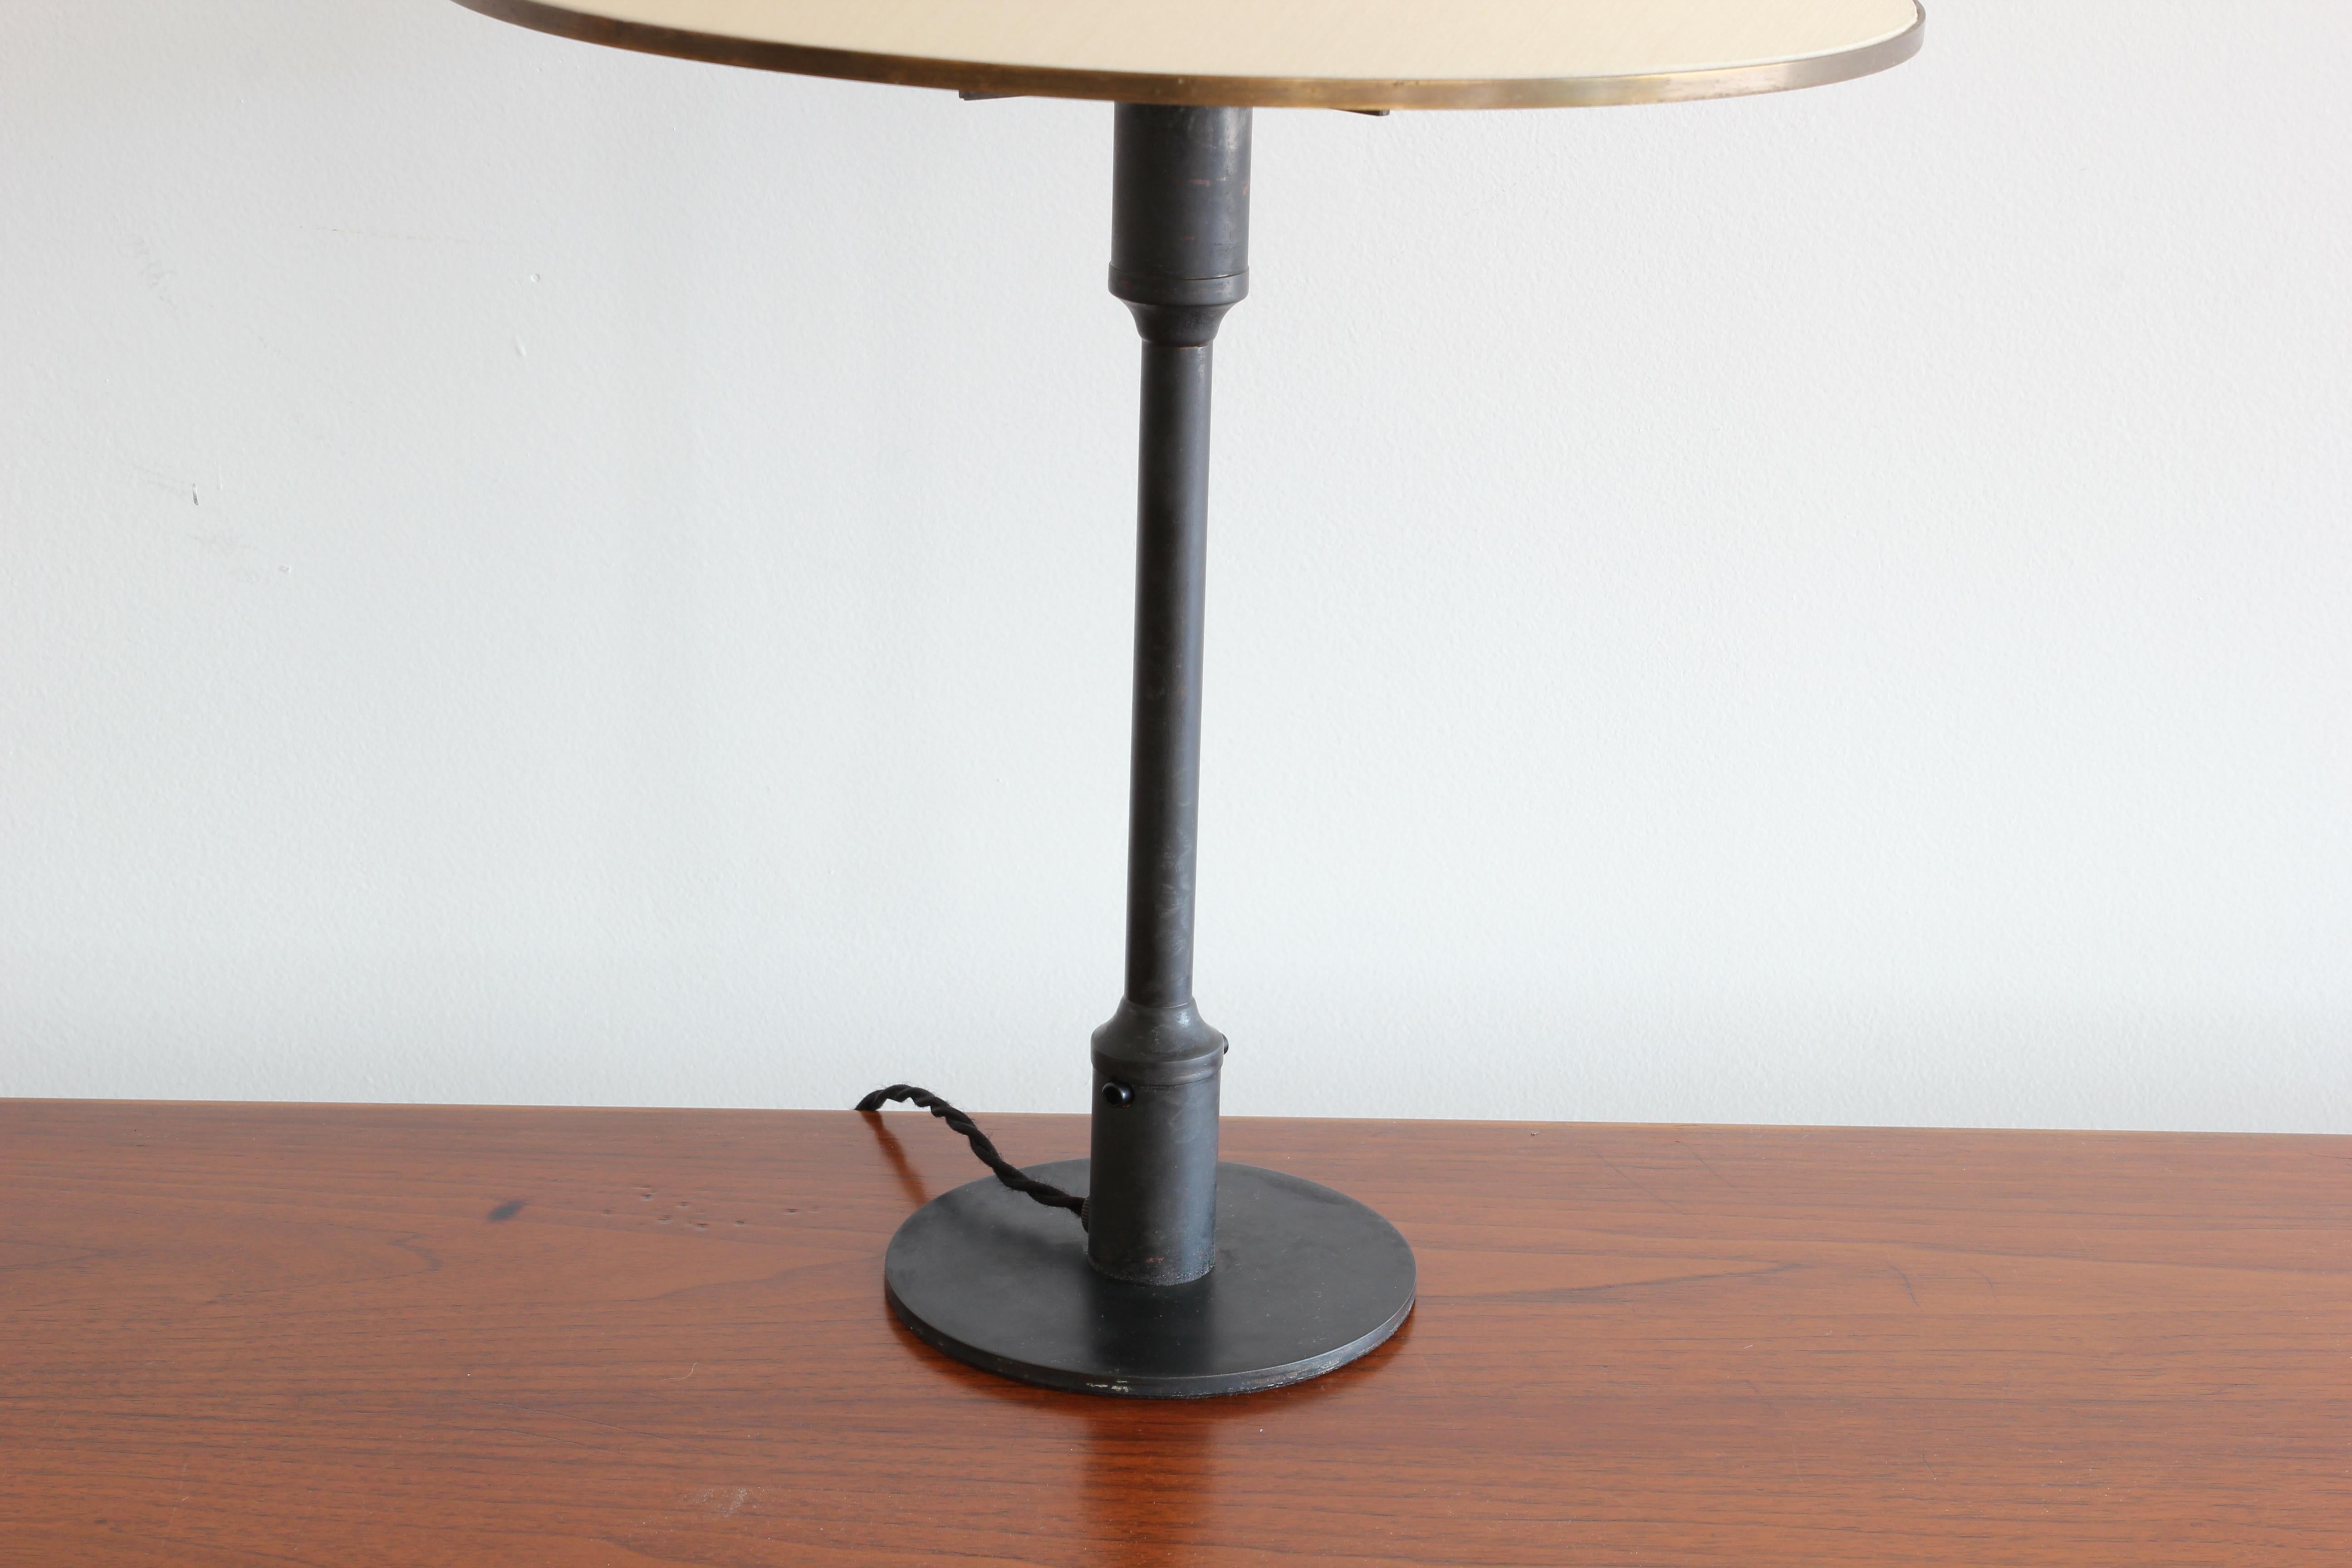 Incredible burnished bronze table lamp with cone shade called the Kongelys Lamp by Niels Rasmussen Thykier for Fog & Mørup. Original metal fittings on shade. 

A pair is also available.

 